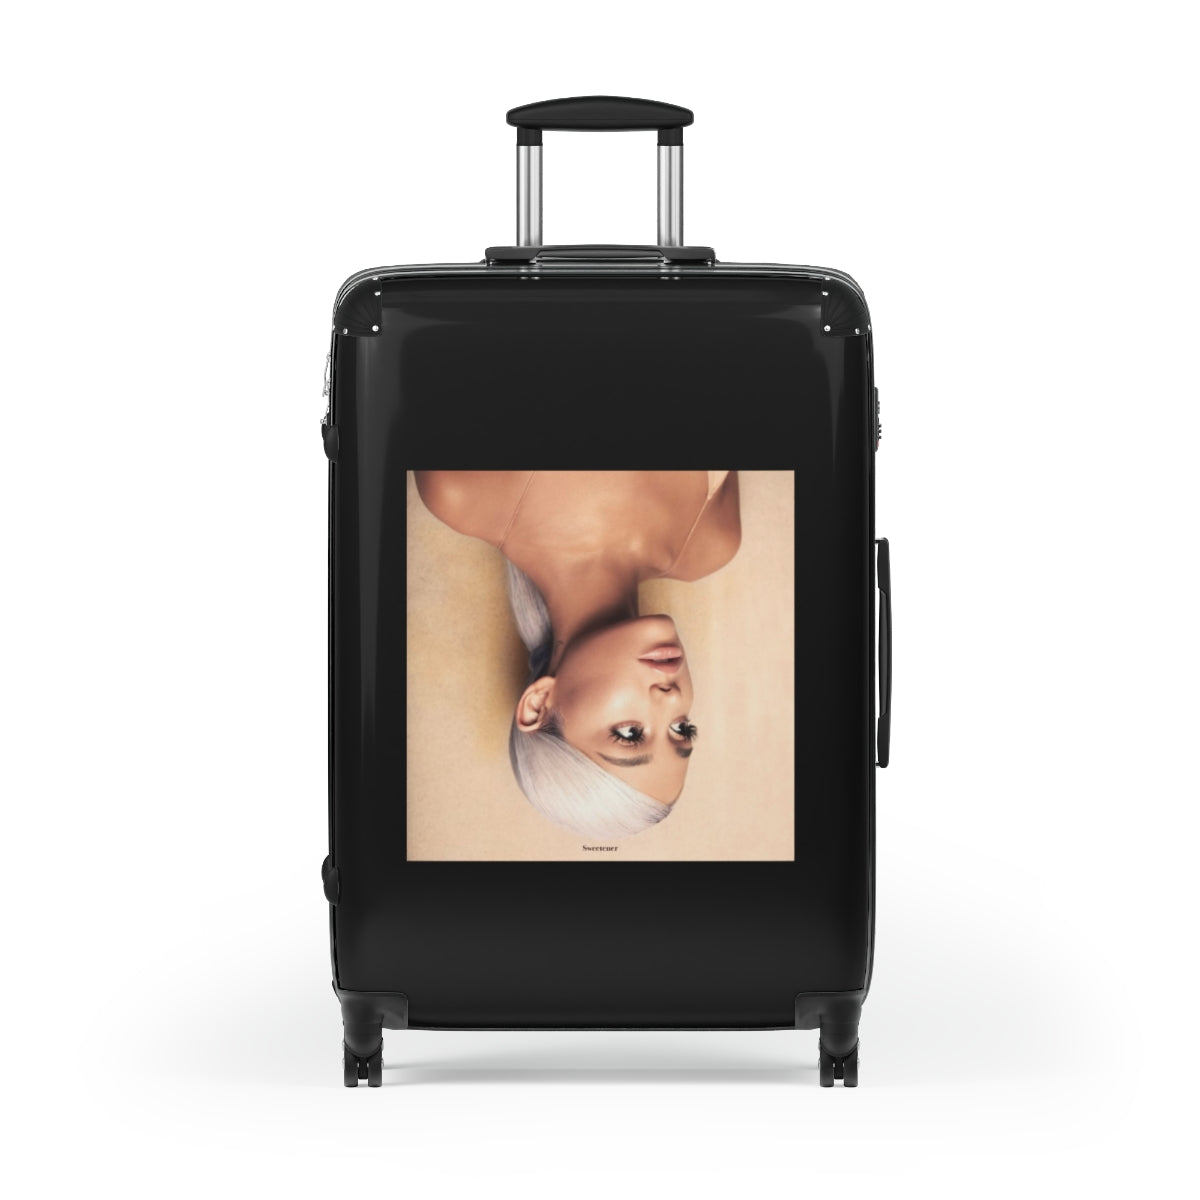 Getrott Ariana Grande Sweetener 2018 Black Cabin Suitcase Extended Storage Adjustable Telescopic Handle Double wheeled Polycarbonate Hard-shell Built-in Lock-Bags-Geotrott